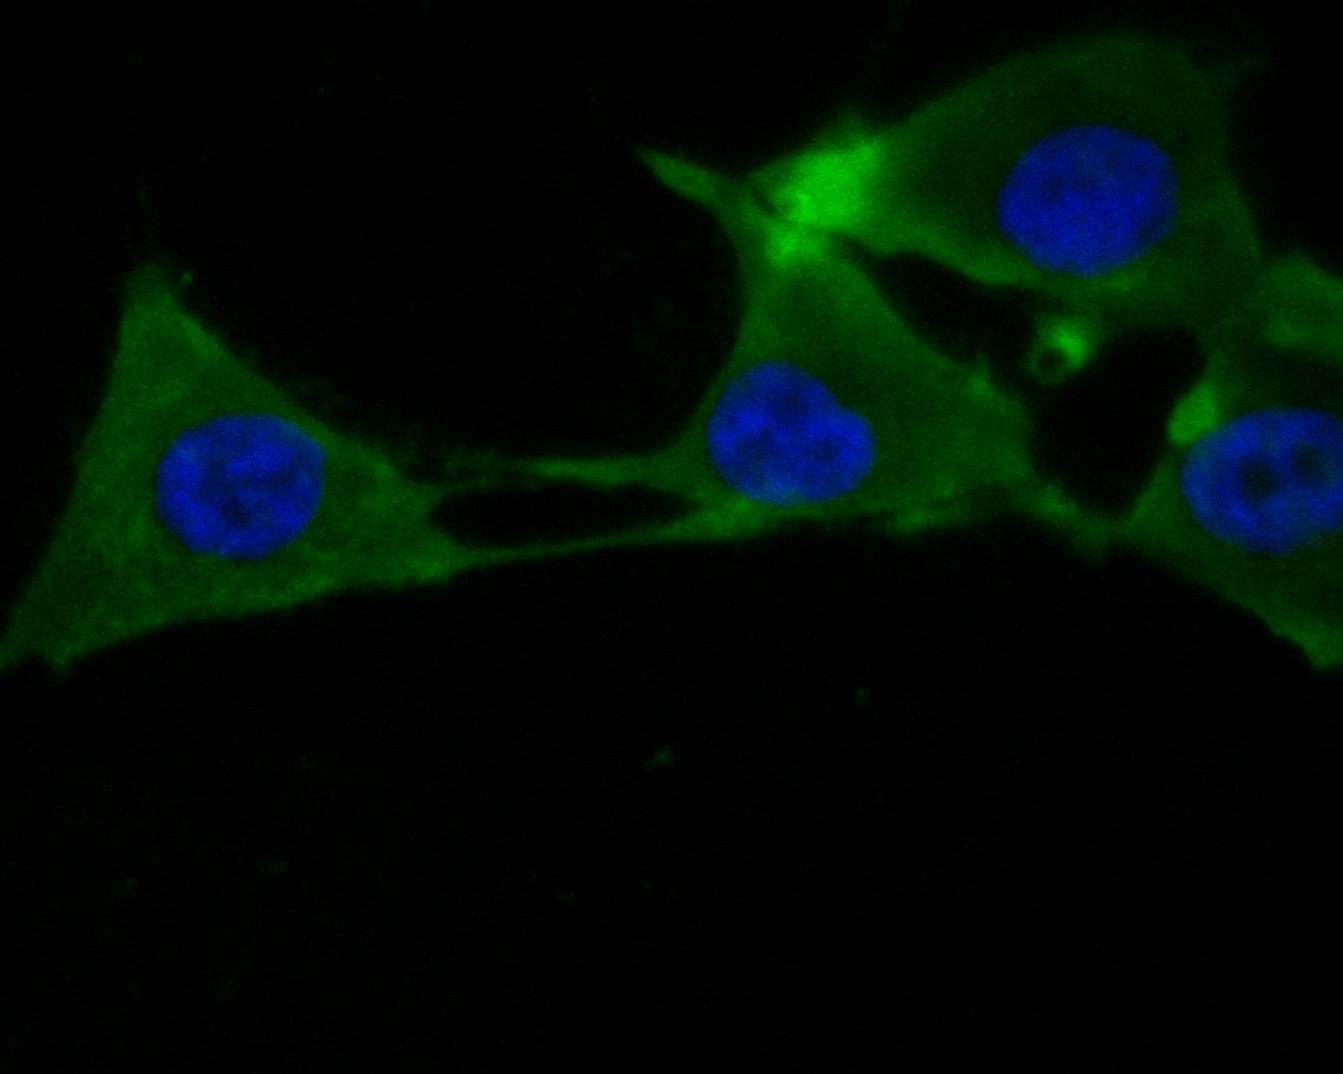 ICC staining of PER3 in MG-63 cells (green). Formalin fixed cells were permeabilized with 0.1% Triton X-100 in TBS for 10 minutes at room temperature and blocked with 1% Blocker BSA for 15 minutes at room temperature. Cells were probed with the primary antibody (HA500072, 1/200) for 1 hour at room temperature, washed with PBS. Alexa Fluor®488 Goat anti-Rabbit IgG was used as the secondary antibody at 1/1,000 dilution. The nuclear counter stain is DAPI (blue).